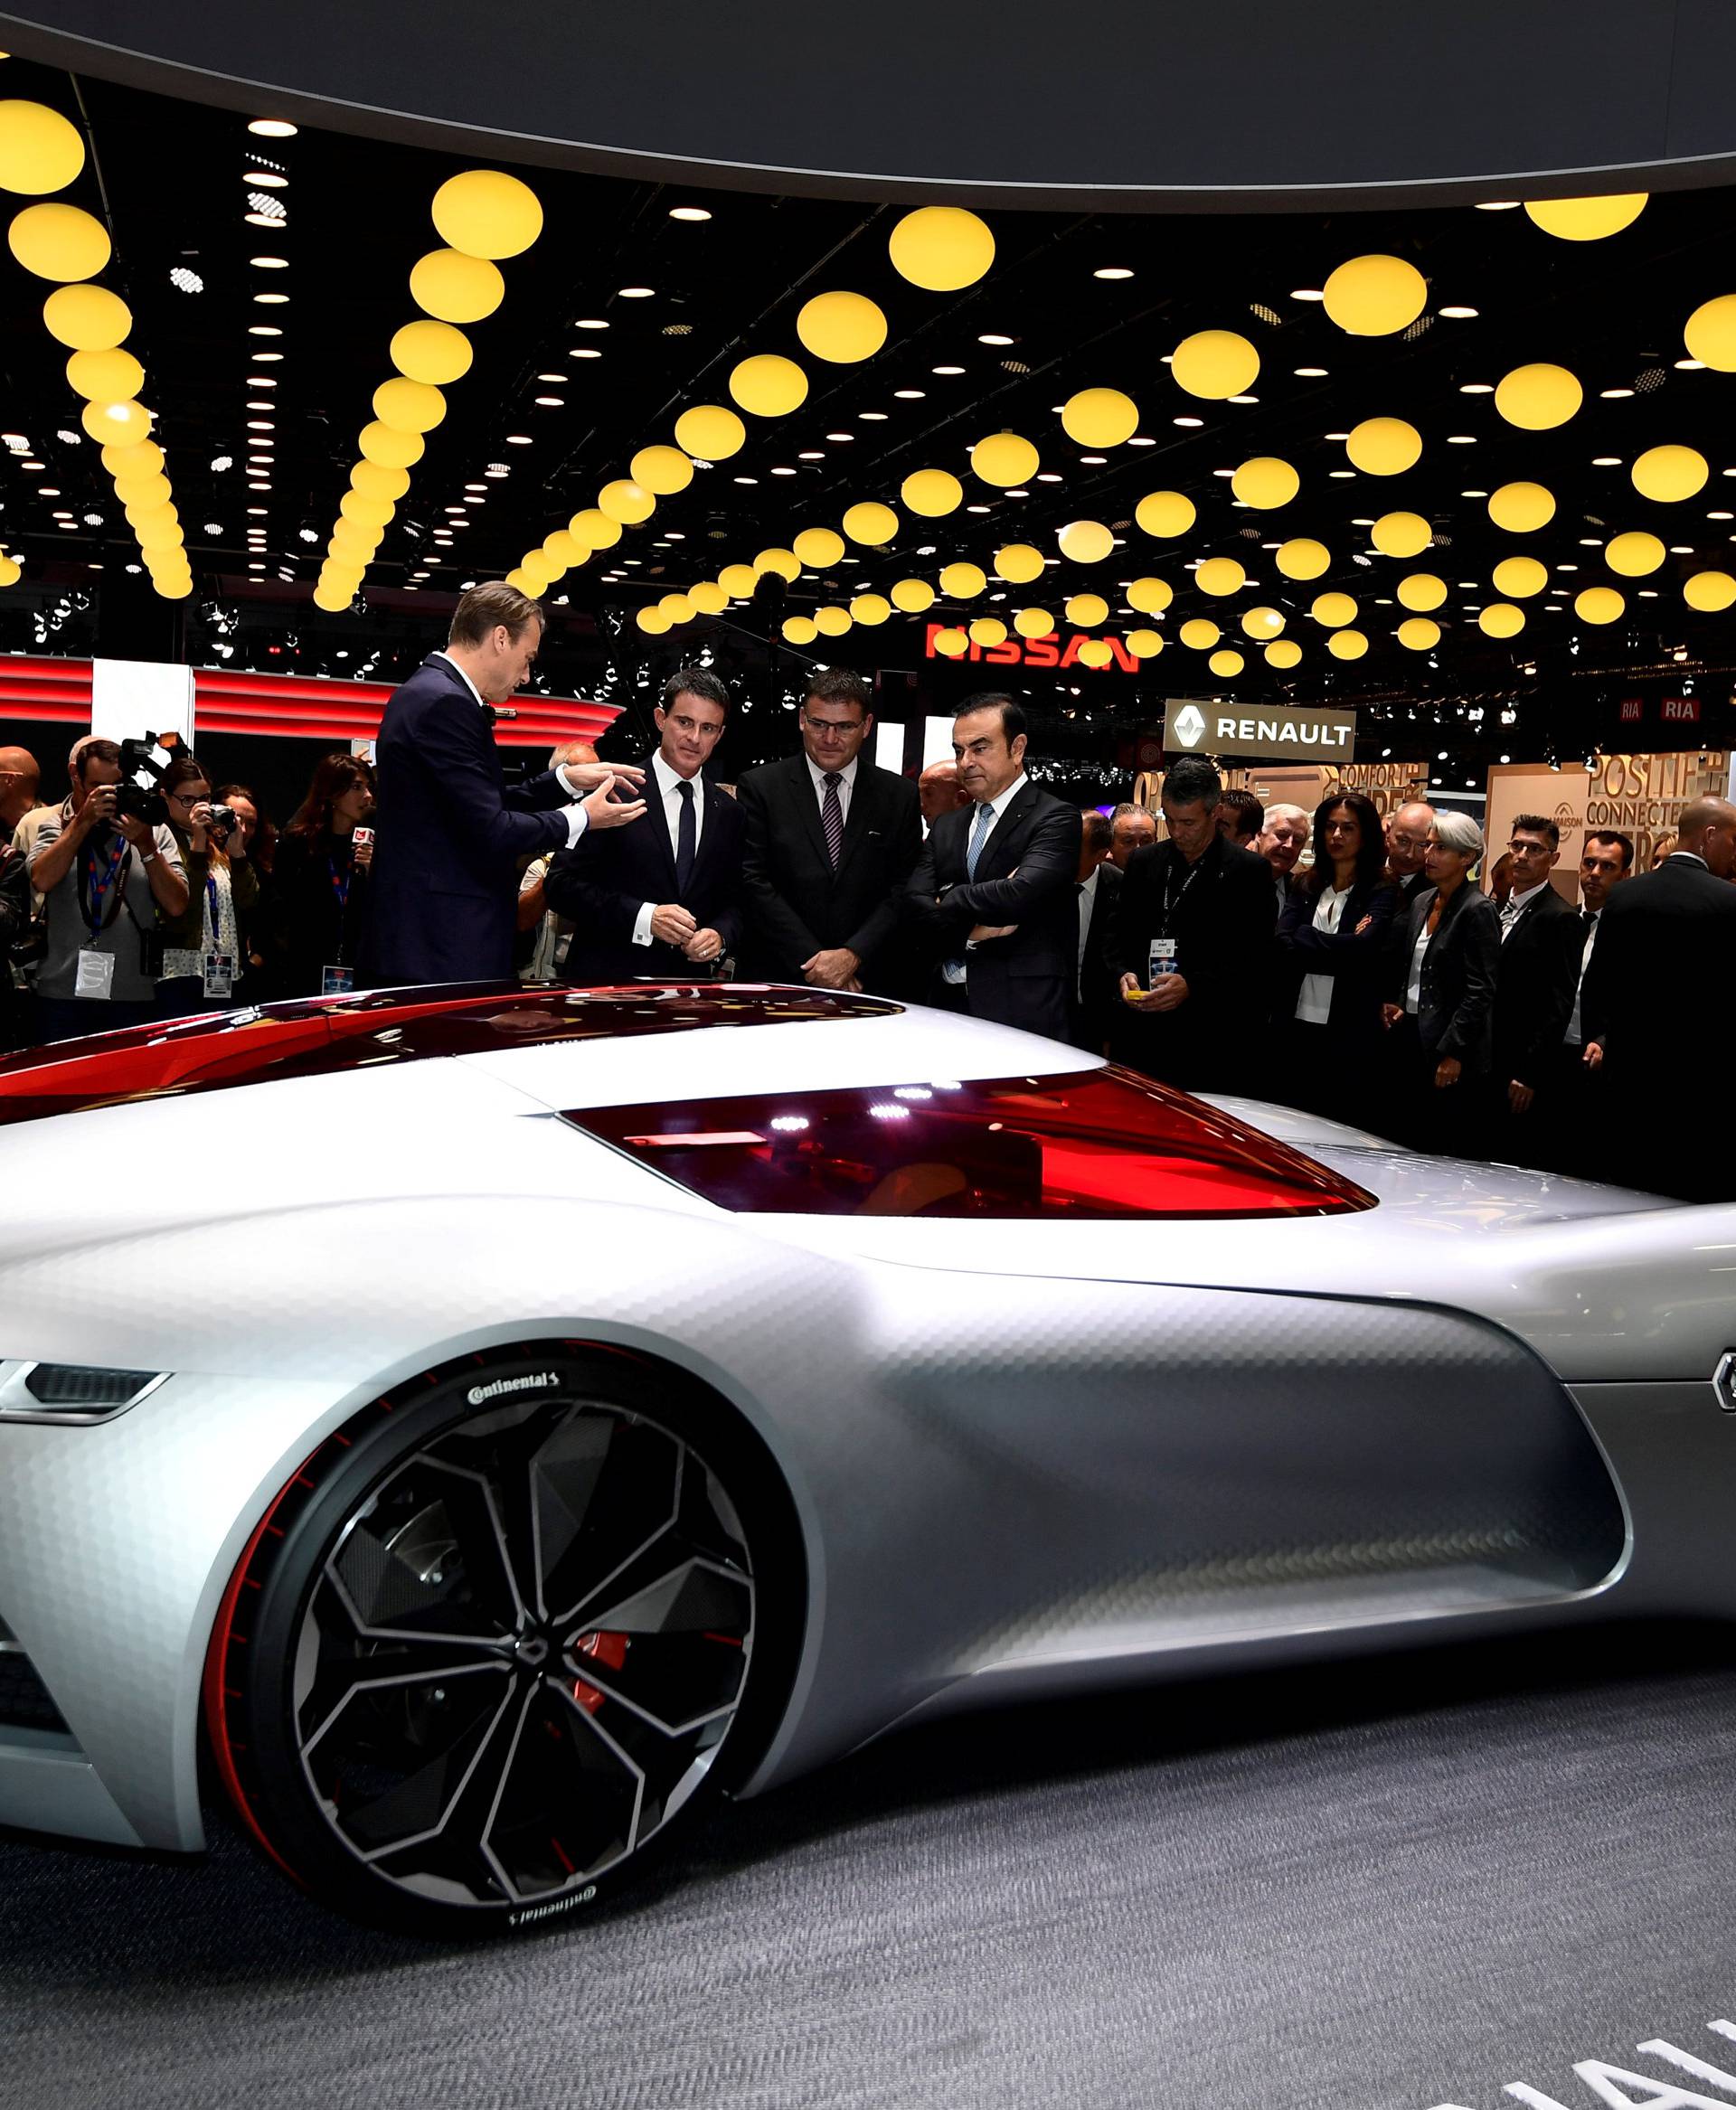 Carlos Ghosn, Chairman and CEO of the Renault-Nissan Alliance, and French Prime Minister Manuel Valls listen to an explication as they look at the Renault concept car "Trezor" at the Paris auto show, in Paris